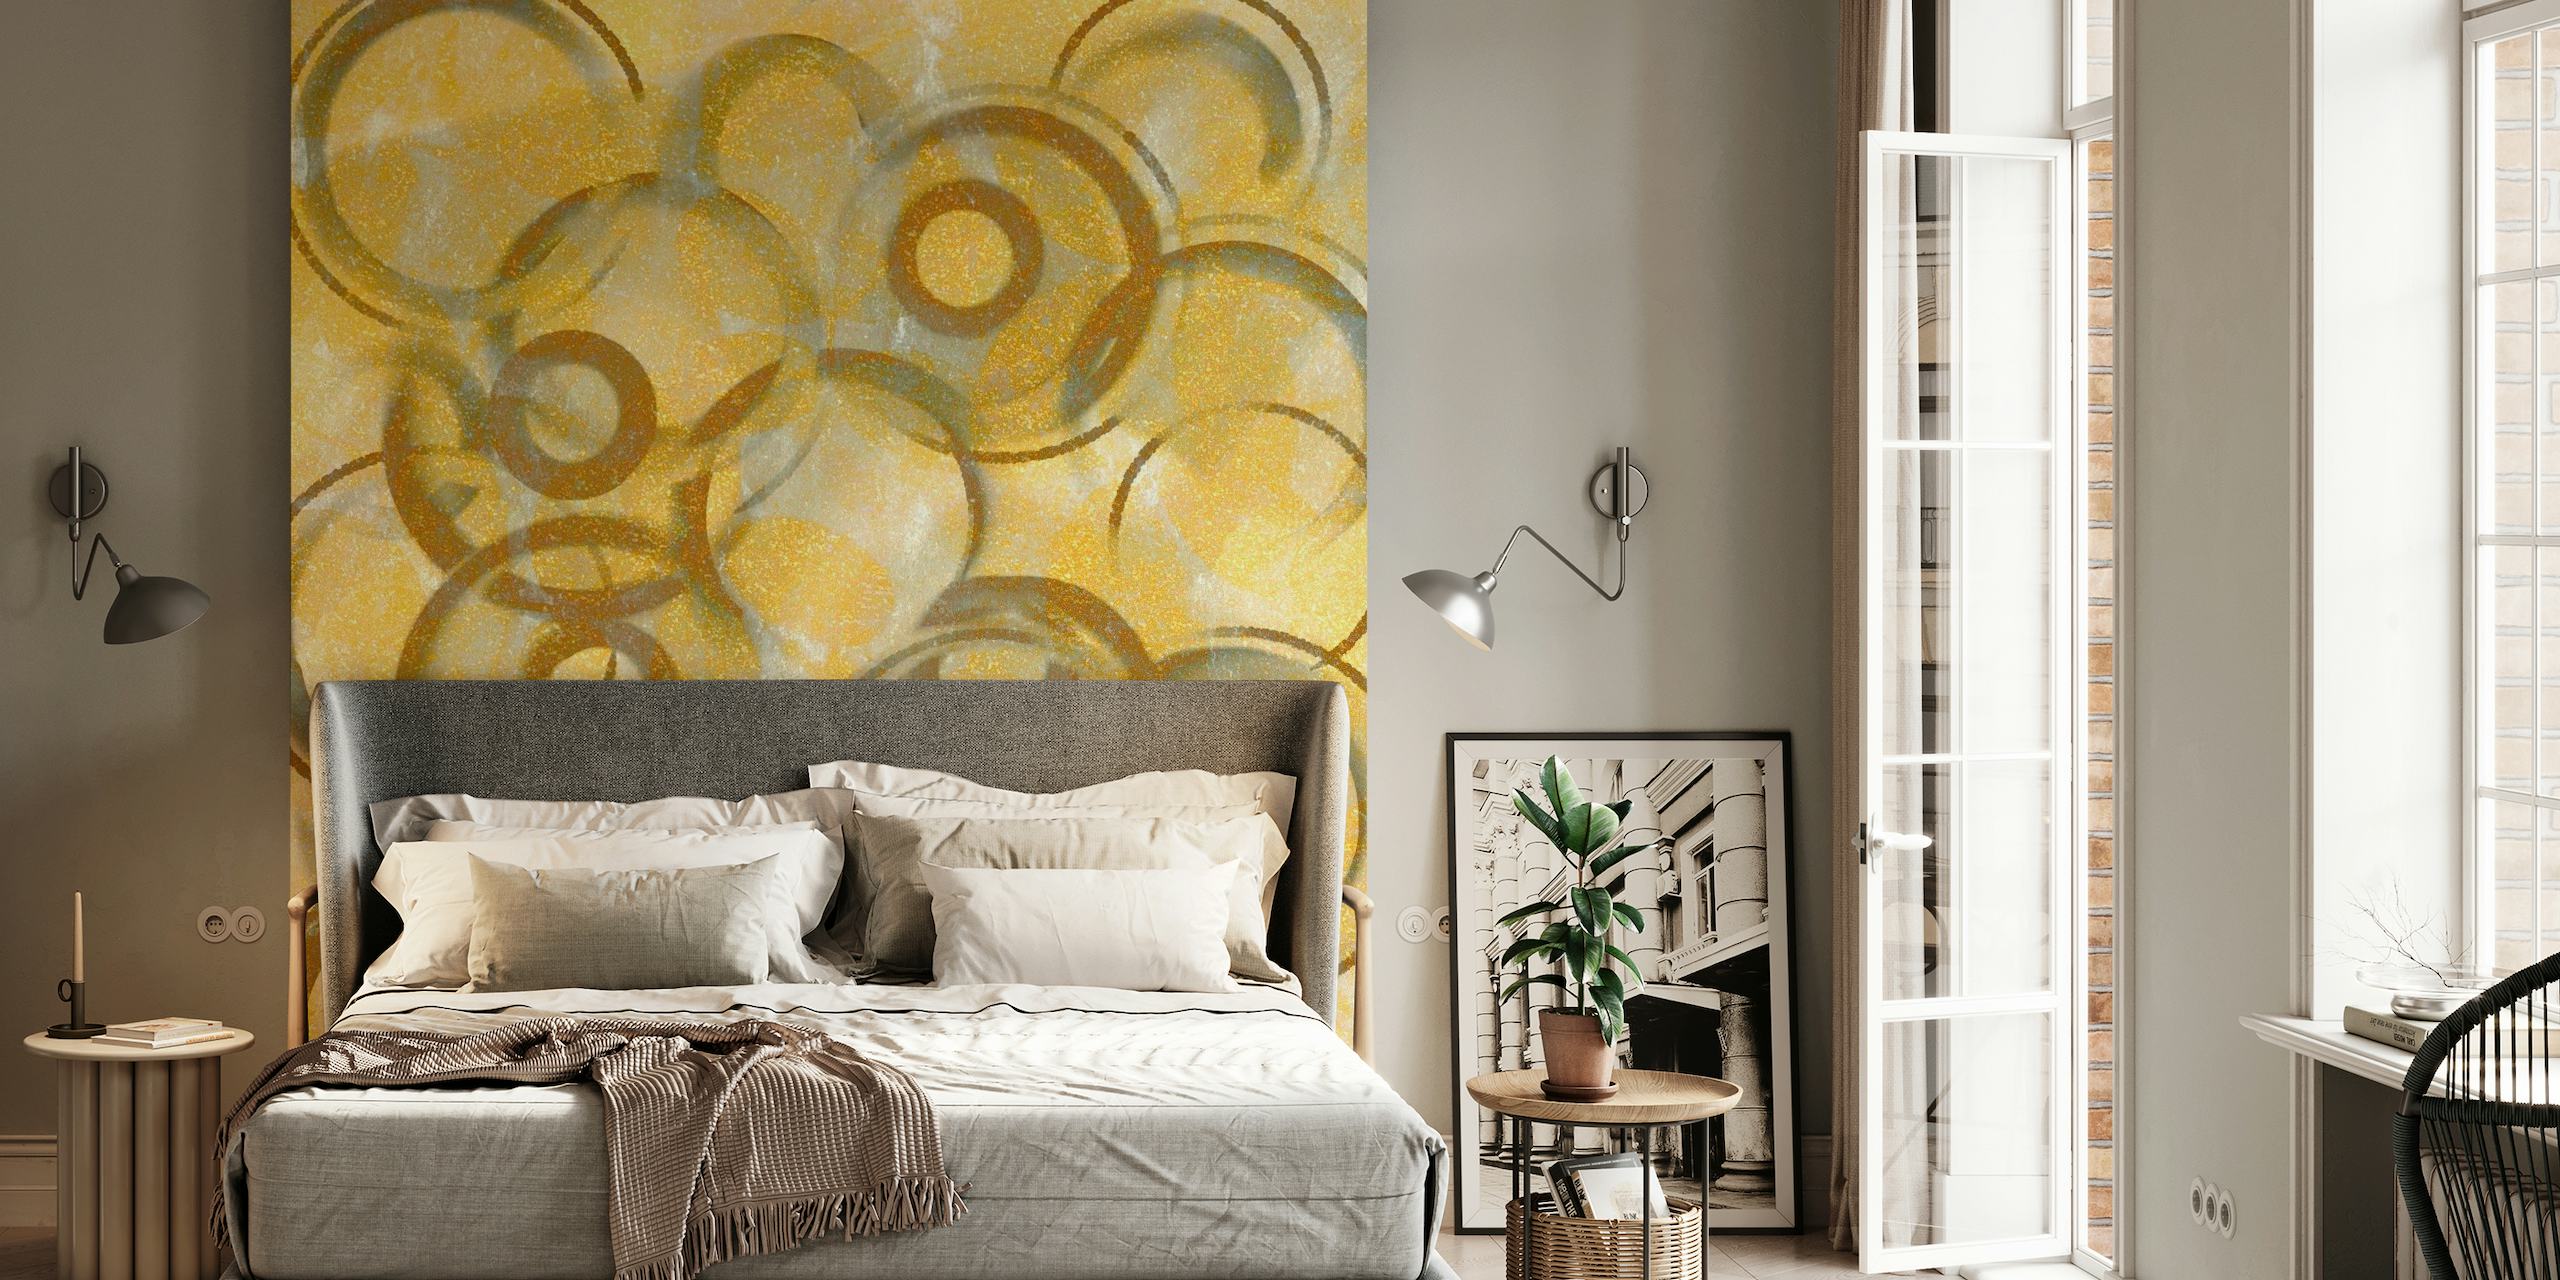 Golden Vintage Abstract wall mural with warm tones and circular designs